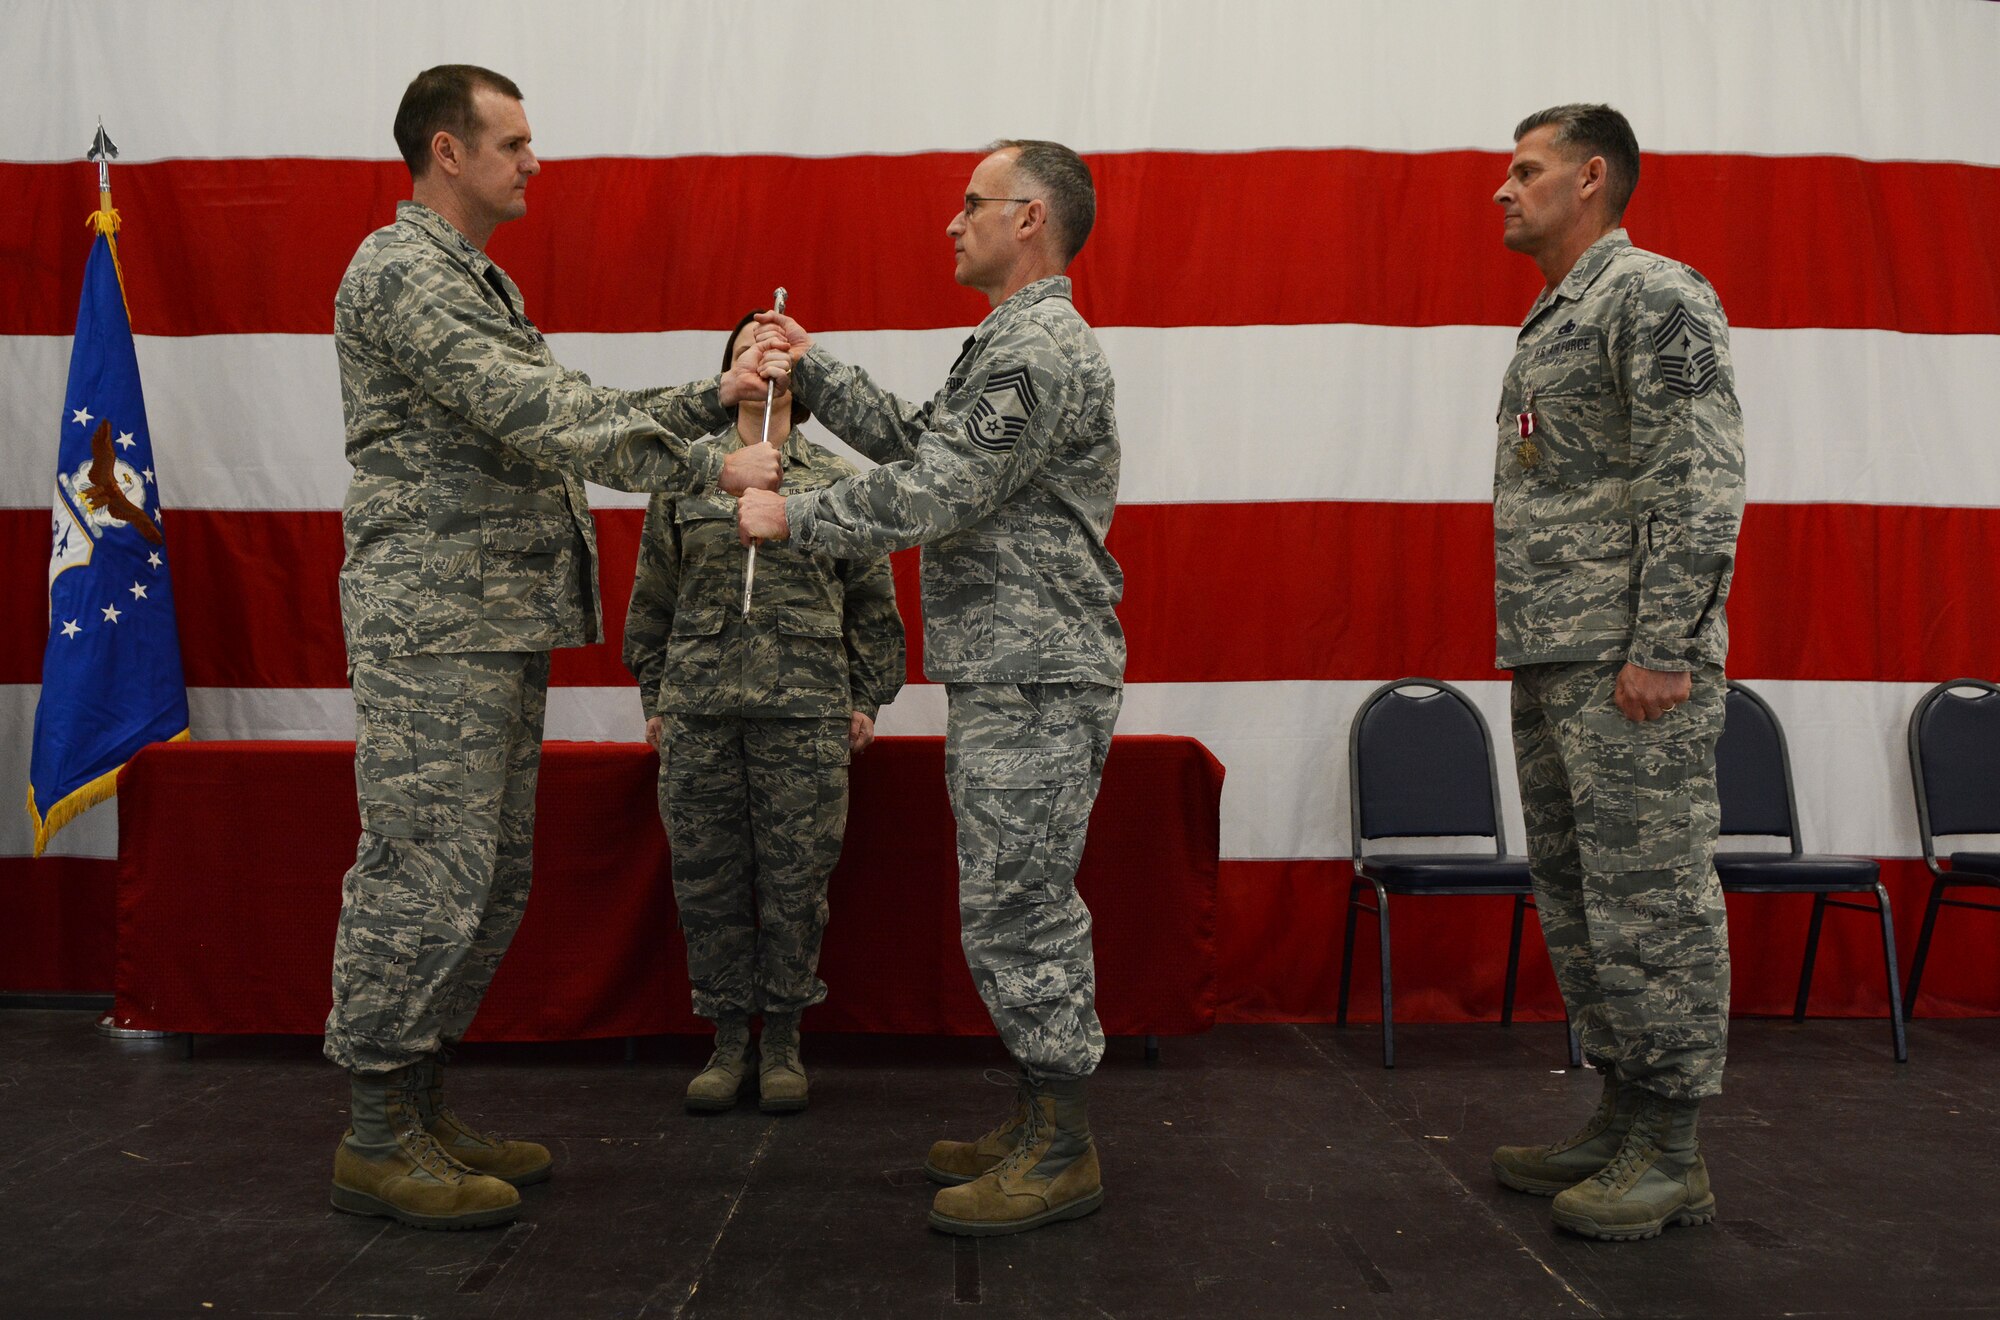 Col. Jeffrey Wiegand, 115th Fighter Wing commander, passes the sword to Chief Master Sgt. James C. McKay, III, 115 FW command chief, during the change of authority ceremony in Hangar 406 Feb. 7, 2016. McKay took over command from Chief Master Sgt. Thomas J. Safer, now the state command chief. (U.S. Air National Guard photo by Senior Airman Kyle Russell)